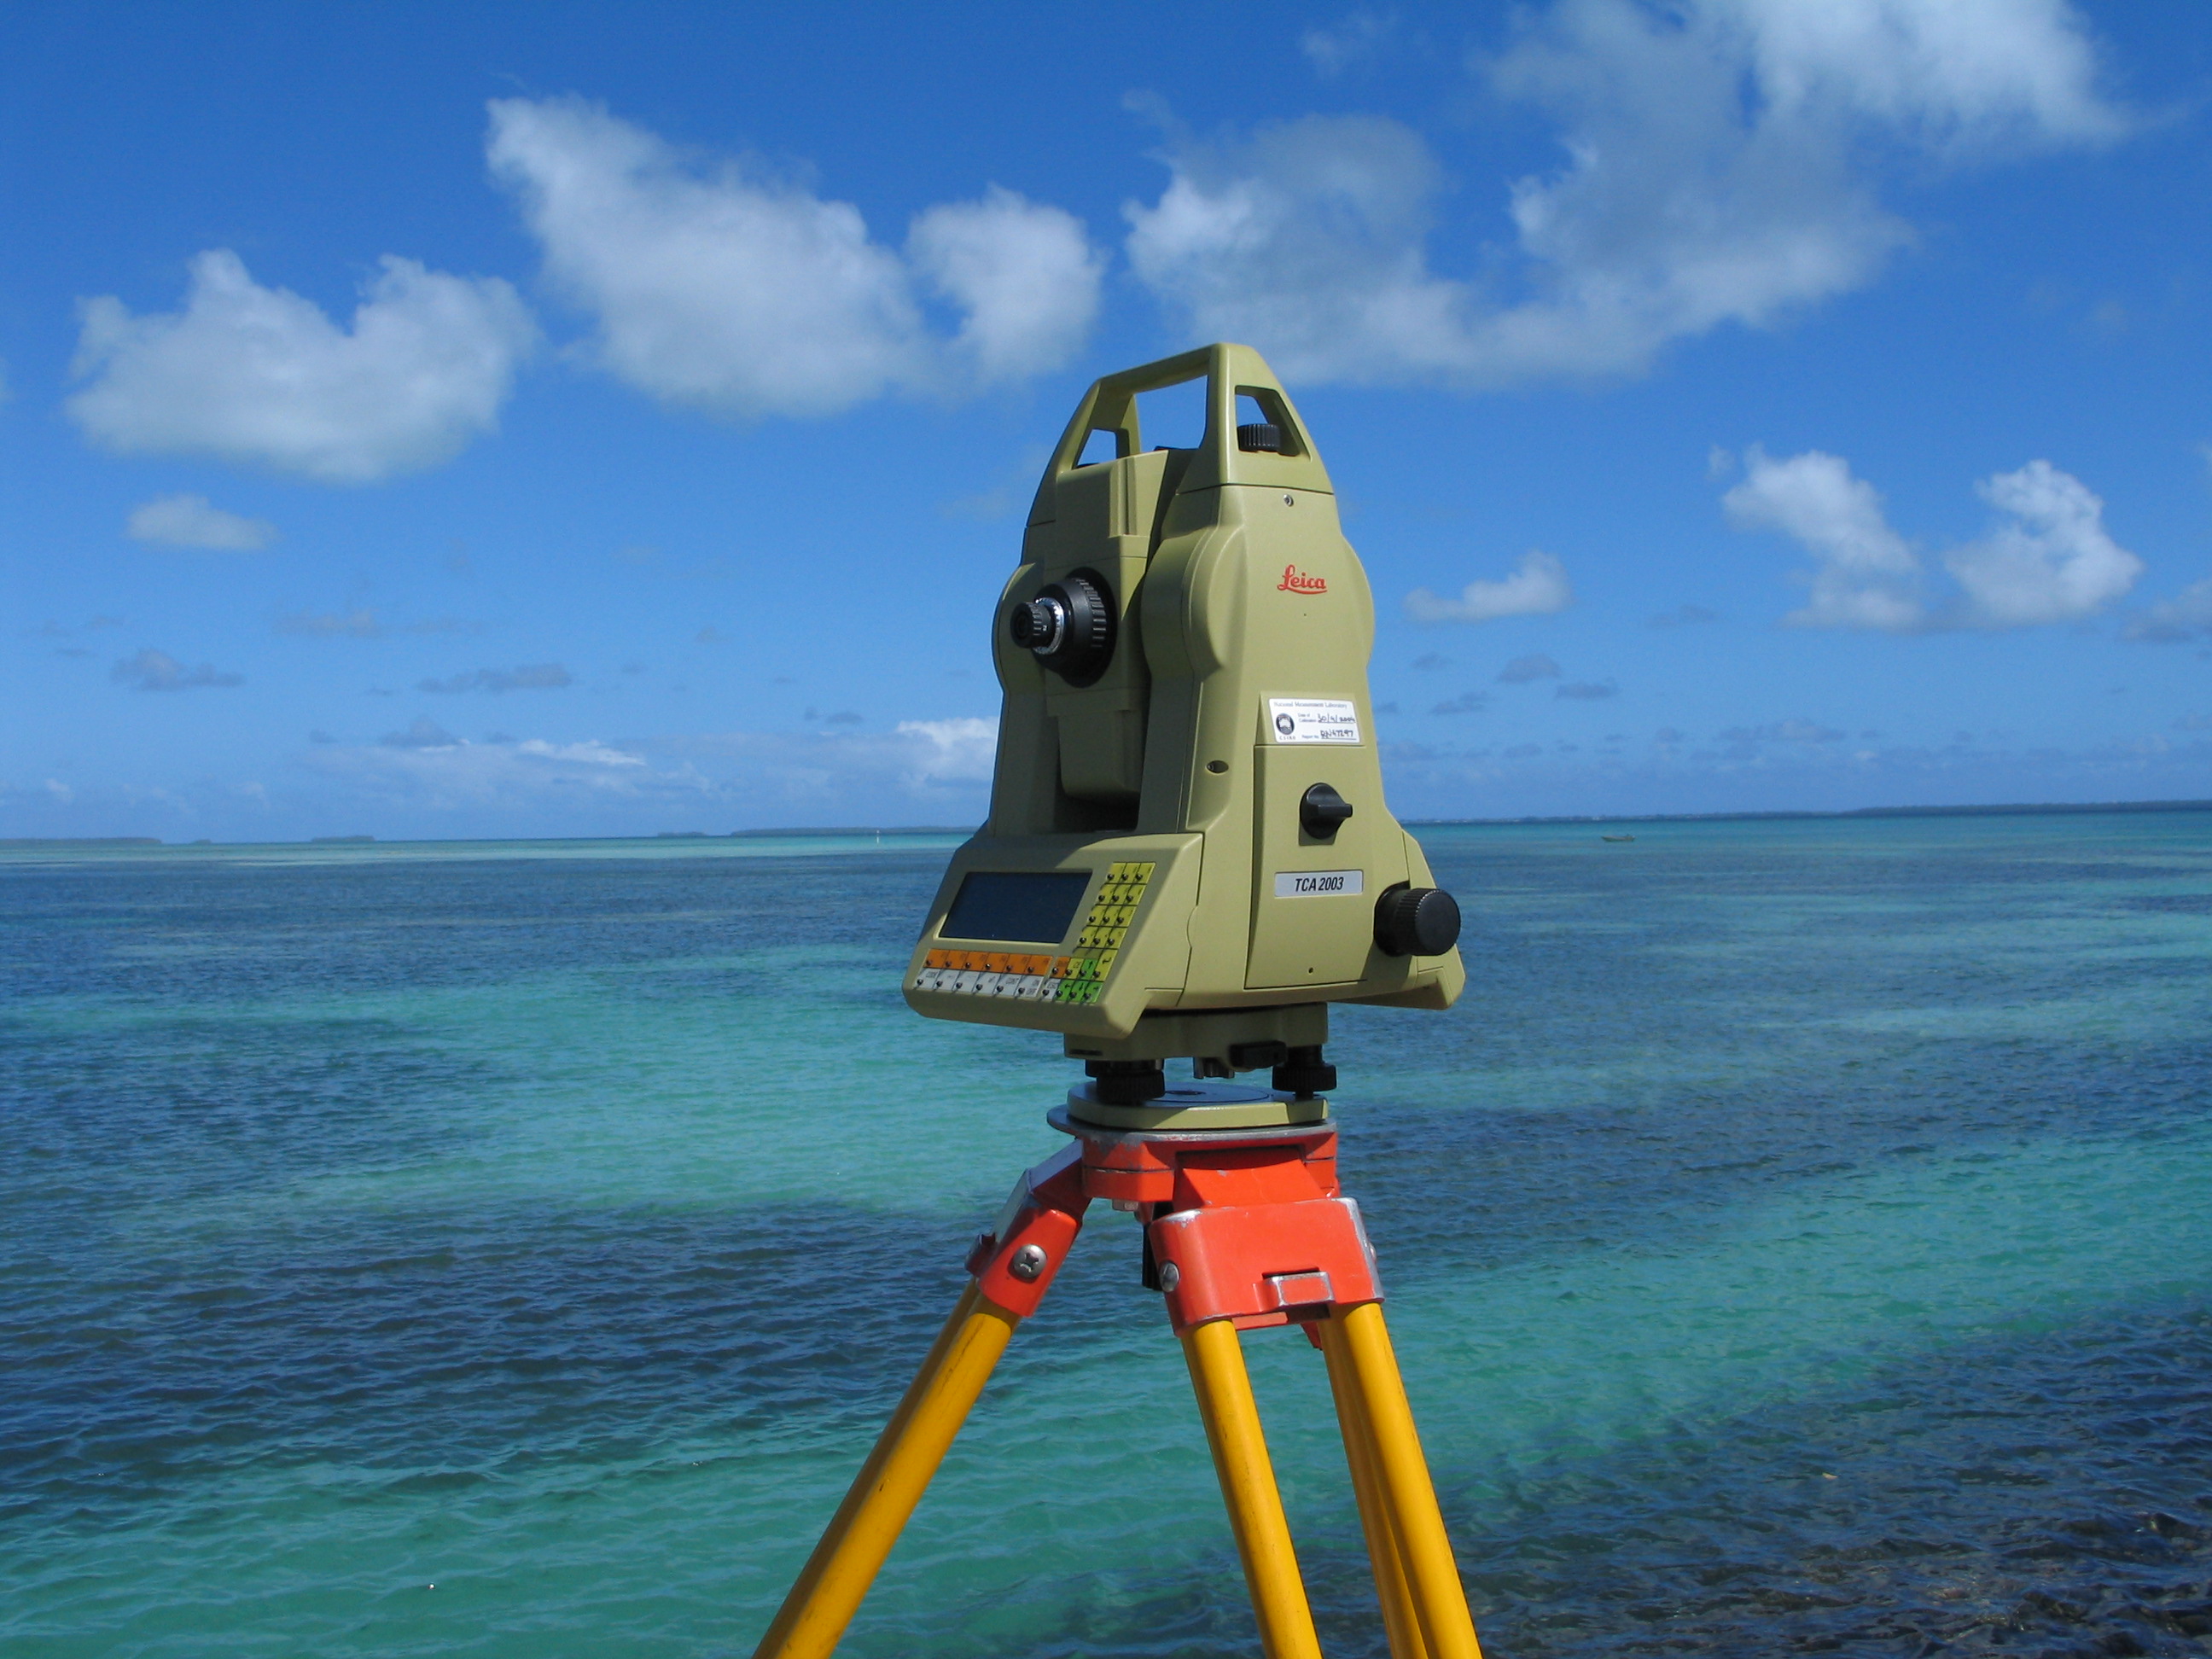 Picture of a modern day total station Theodolite machine, lookng out over an ocean view.